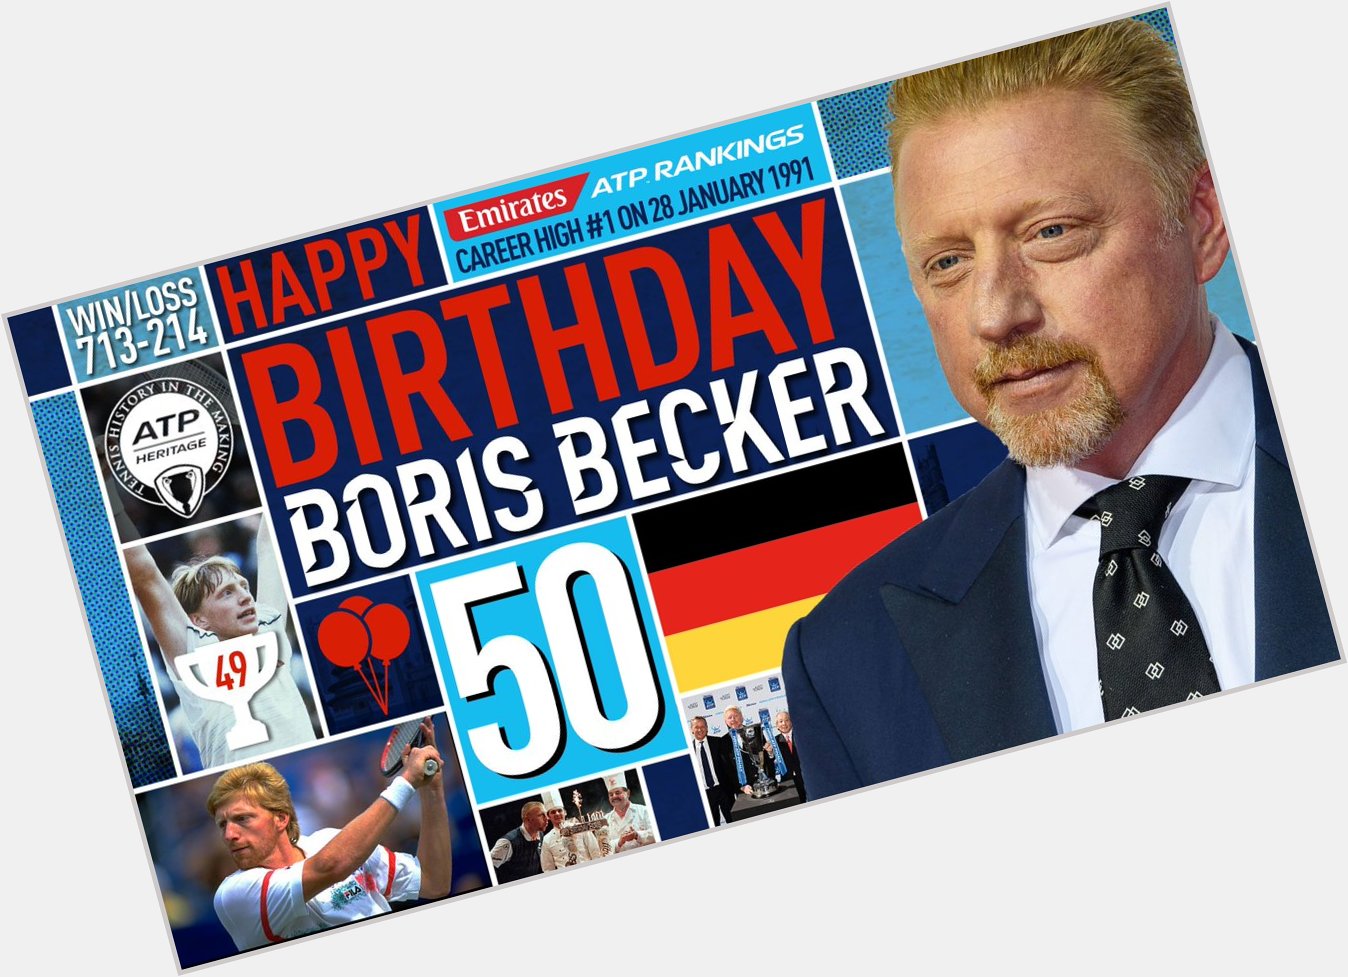 Happy 5 0 th Birthday to  legend,  Have a great day, Boris! Profile  